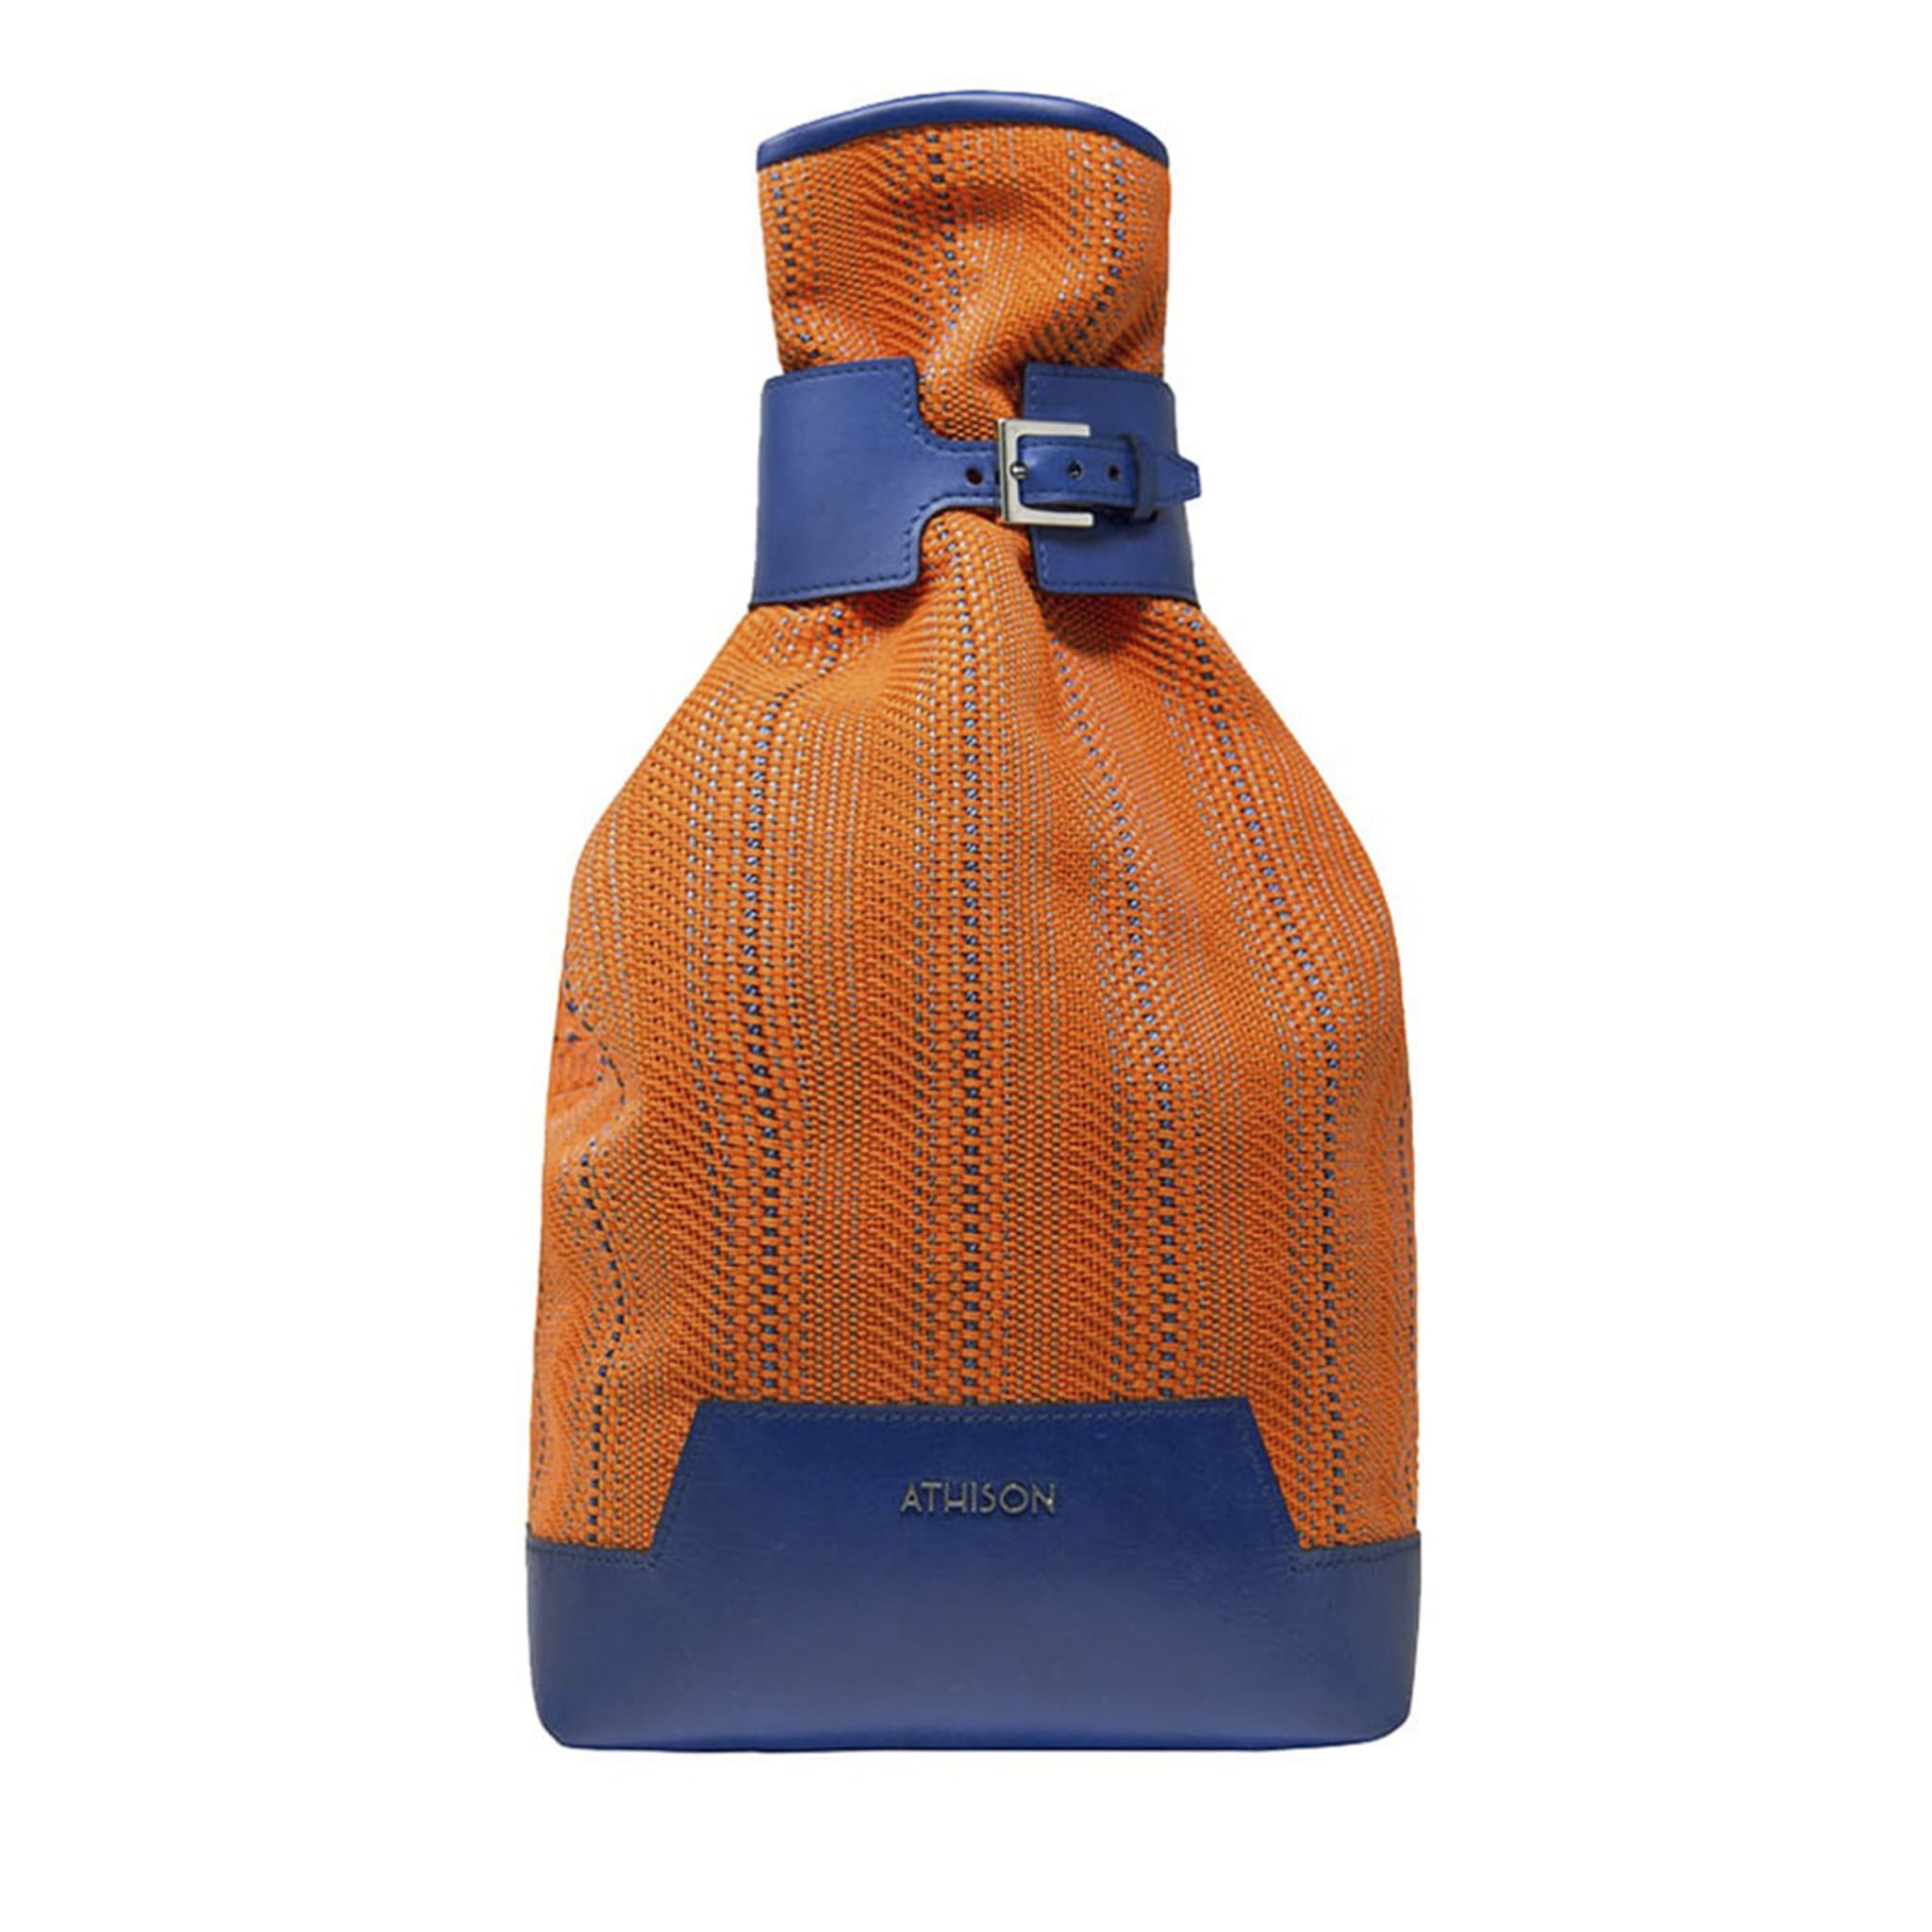 Leather and Braided Cotton Backpack “Veglia” - Orange and Blue - Main view